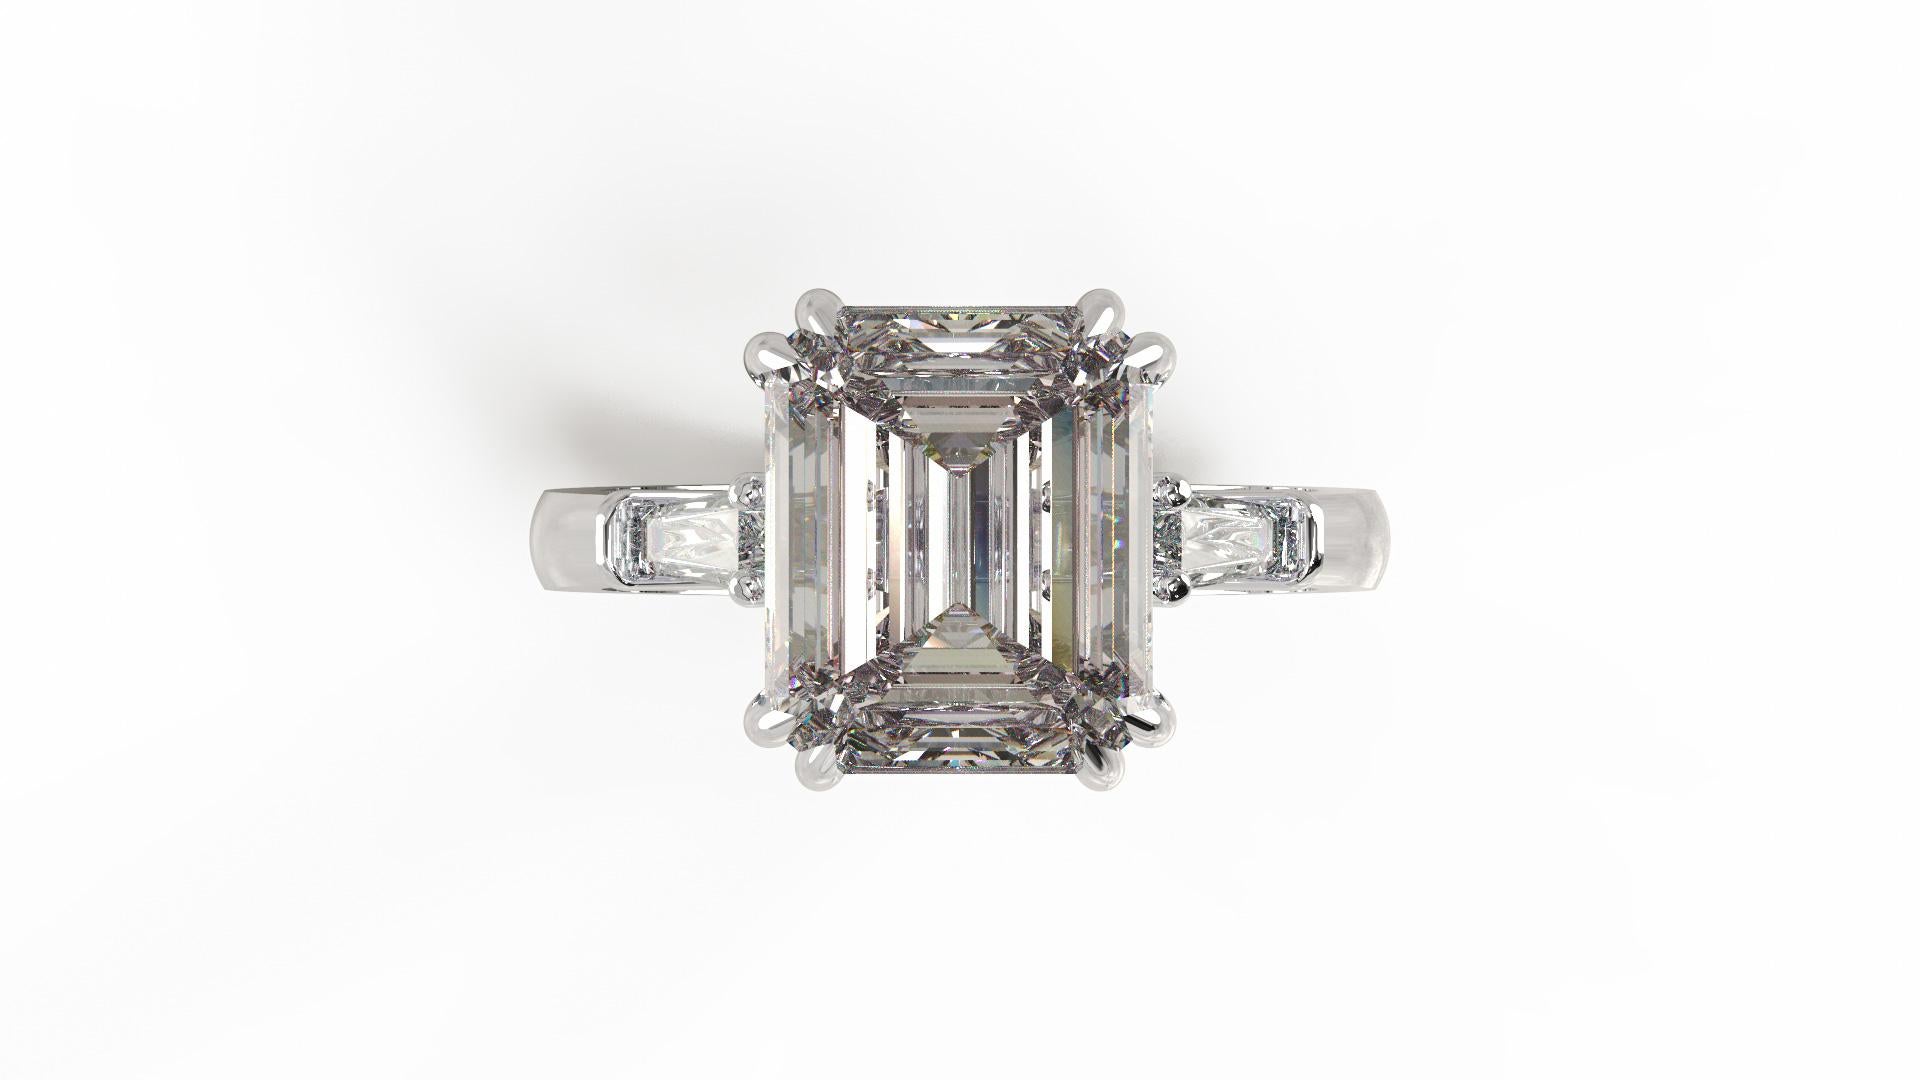 GIA Certified 2.50 Carat Emerald Cut Diamond Ring
Internally Flawless Clarity
I Color
